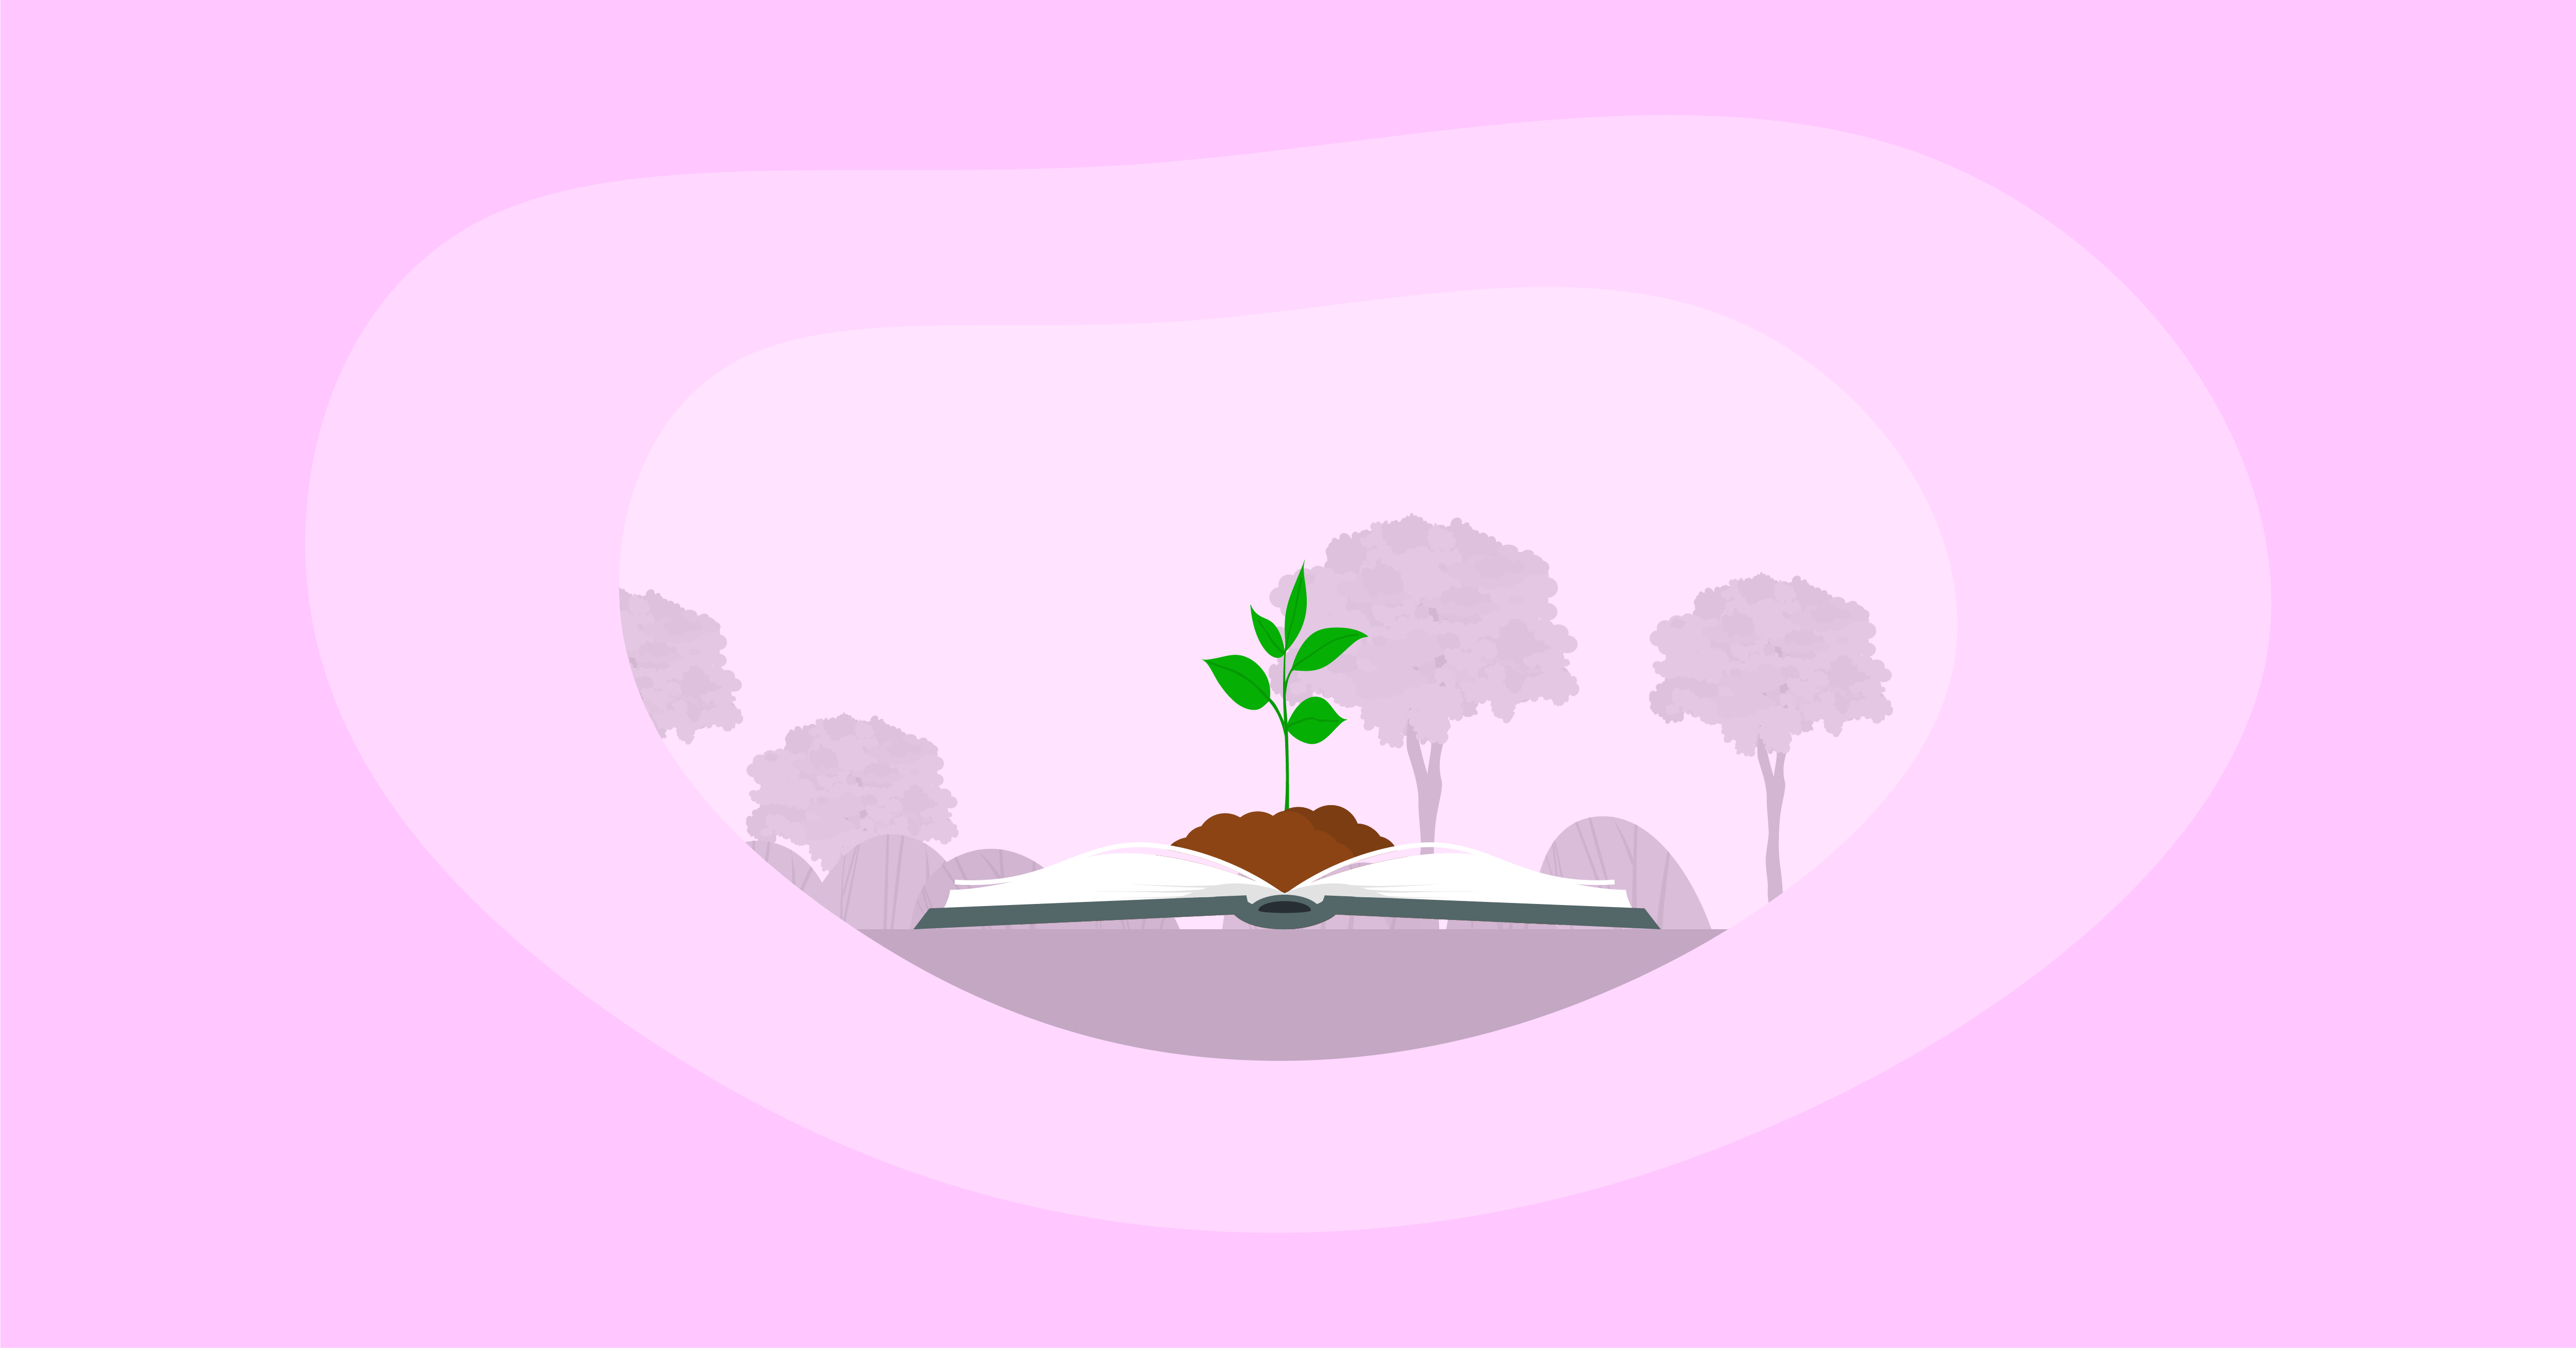 Attempted illustration of afforestation on top of a book